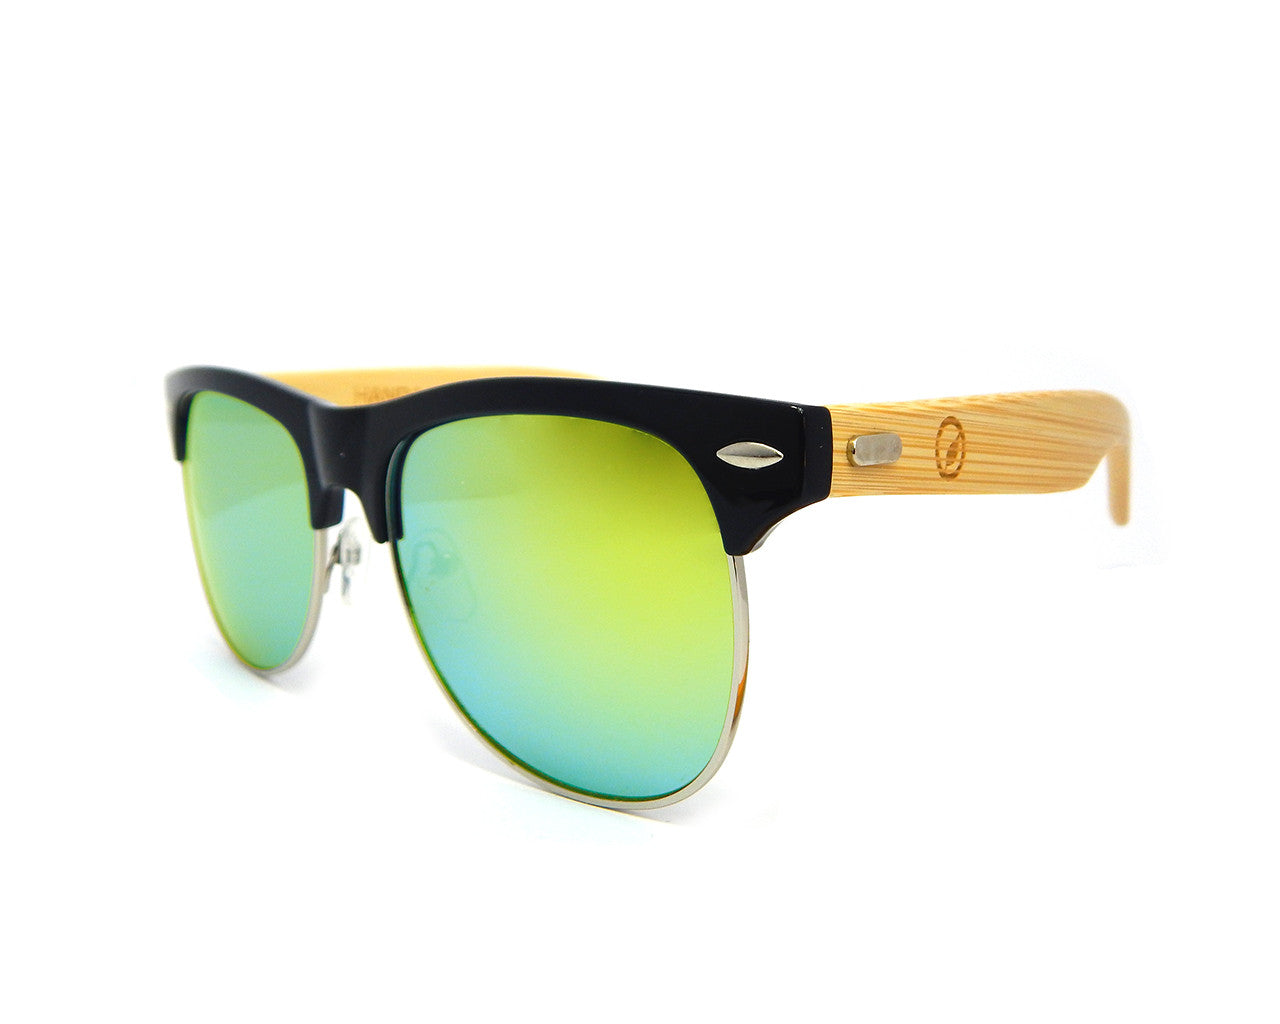 Bamboo Sunglasses Gold Mirror BSC04 - Natural Clothes Bamboo Clothing & Accessories for Men & Women 